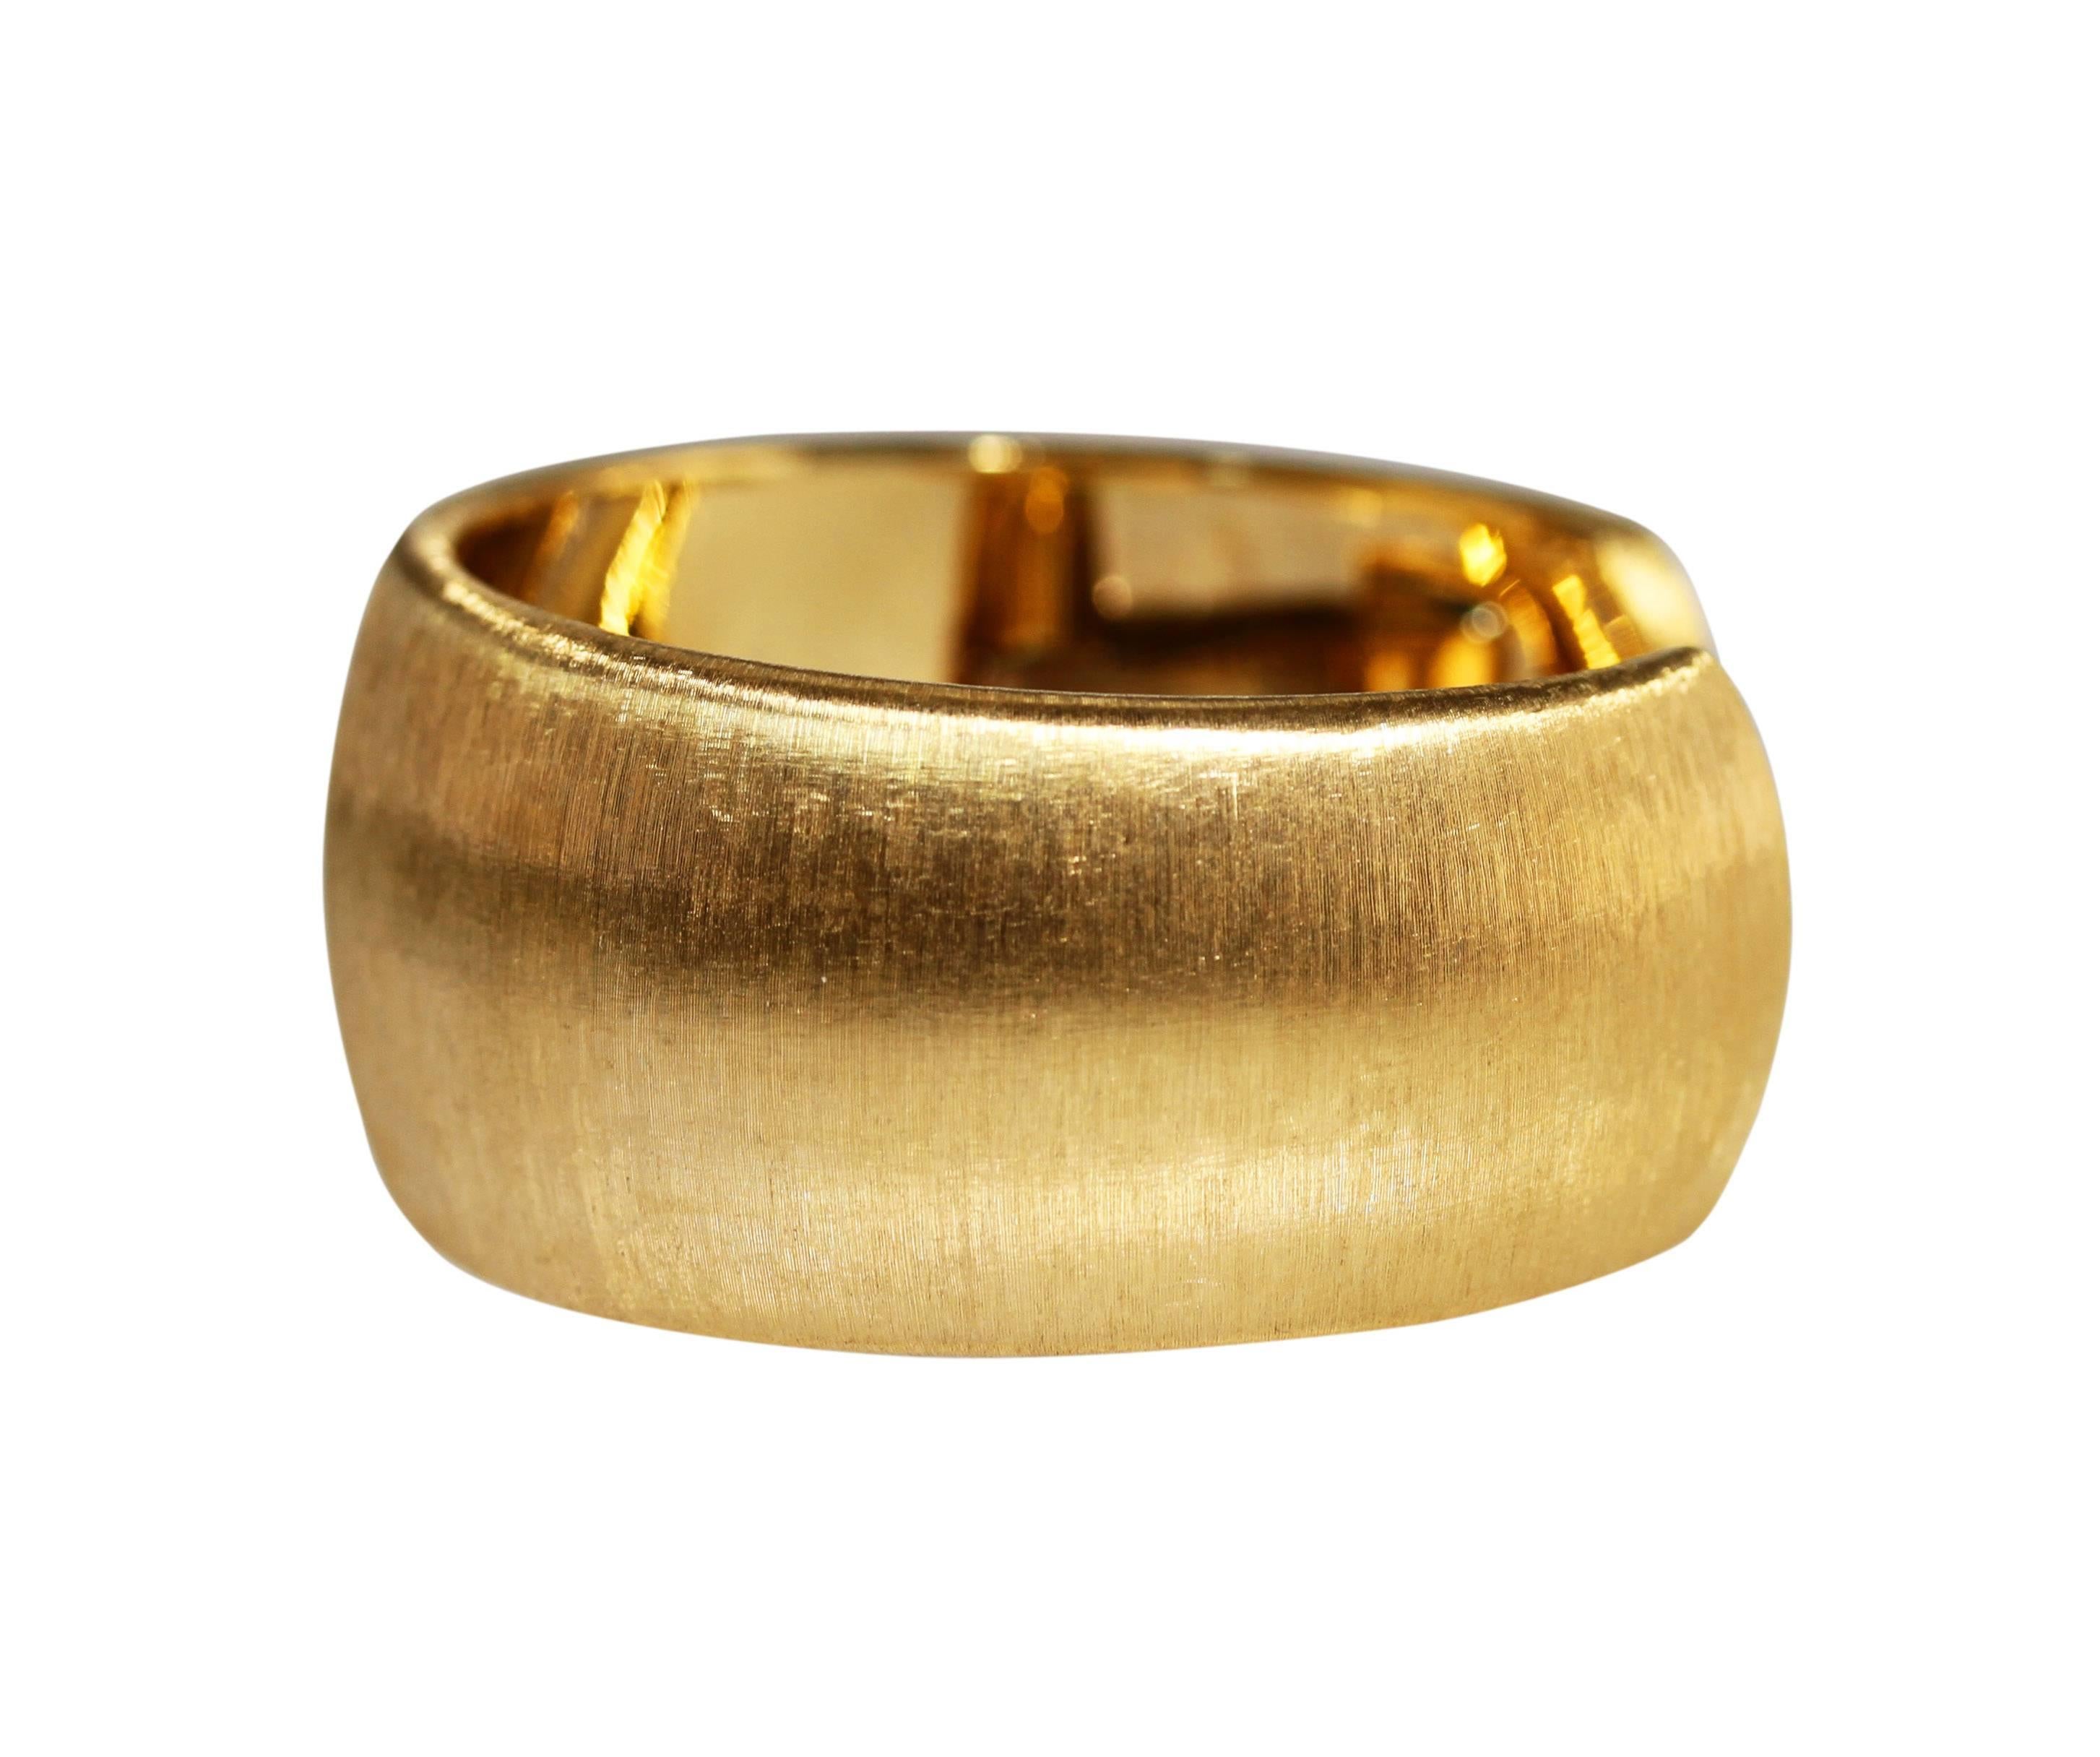 An 18 karat yellow gold cuff bracelet by Buccellati, Italy, the wide cuff of brushed gold appearance with one side hinged, the cuff measuring 6 1/4 inches in circumference and tapering from 1 to 7/8 inch in width, gross weight 54.9 grams, signed